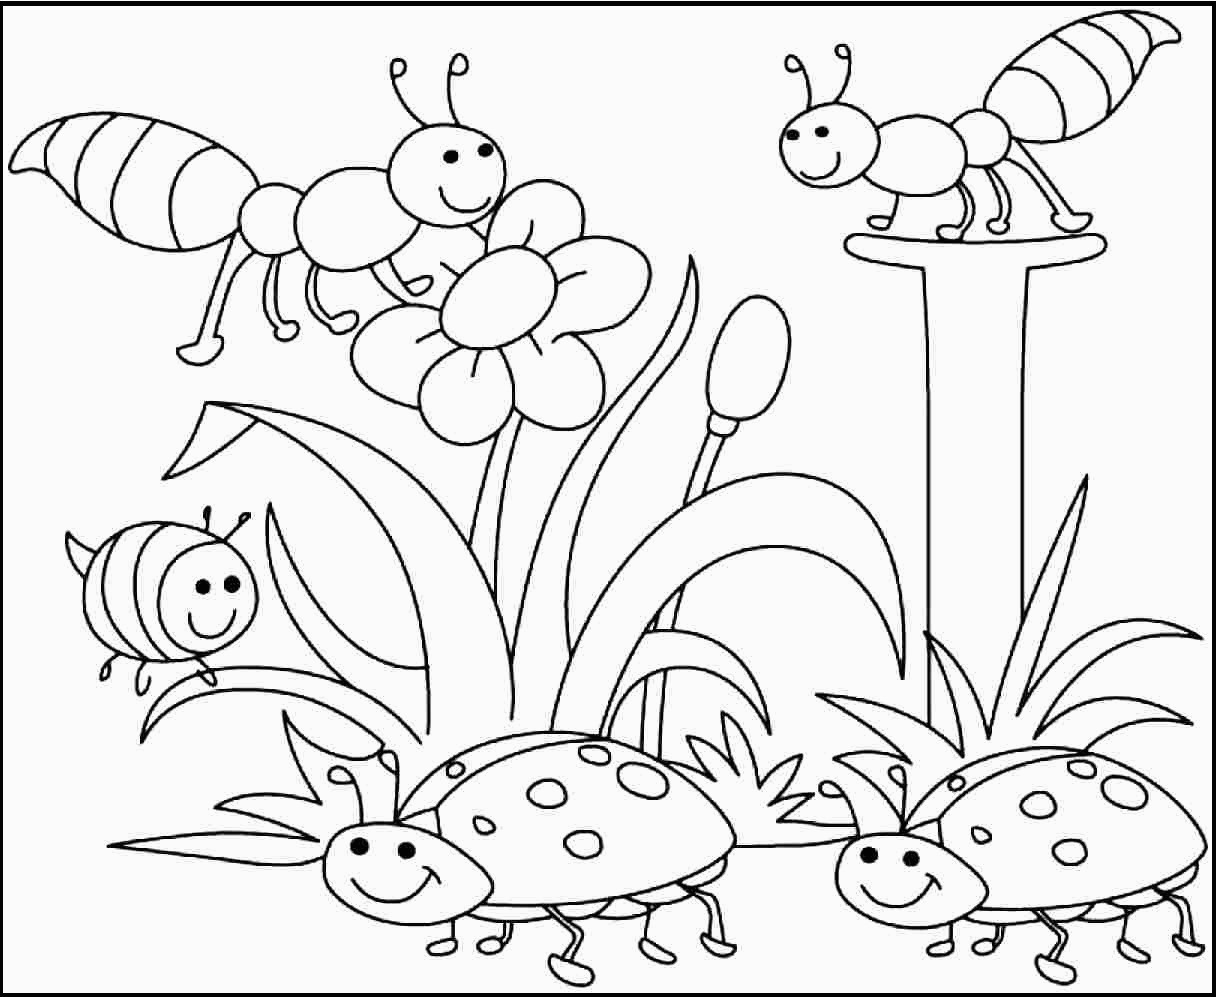 Coloring Pages Free Printable Spring Coloring Pages Kids For Kids - Spring Coloring Sheets Free Printable